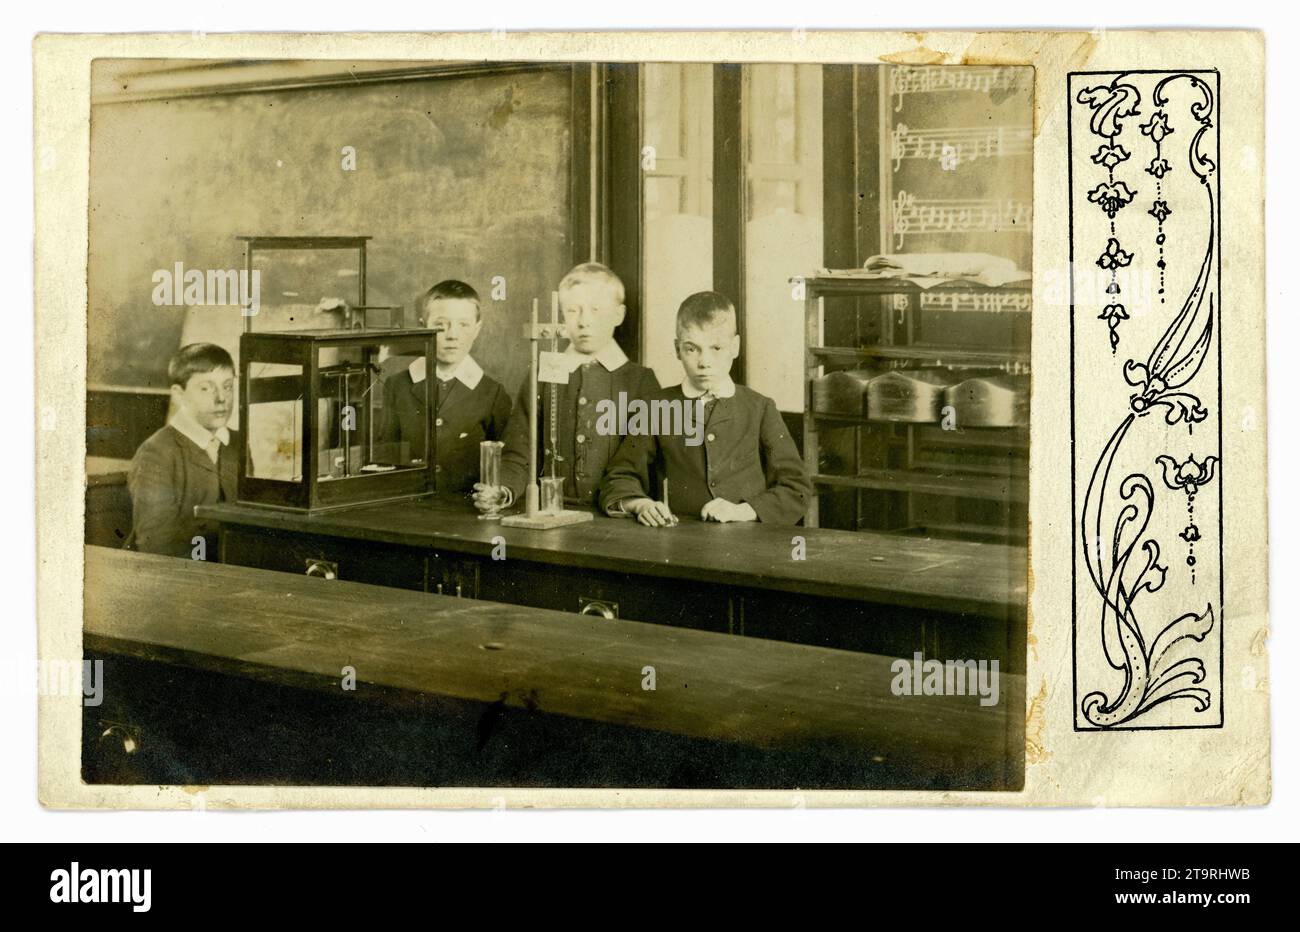 Original Edwardian postcard of schoolboys attending science lesson in classroom, with equipment. Circa 1905, U.K. Stock Photo